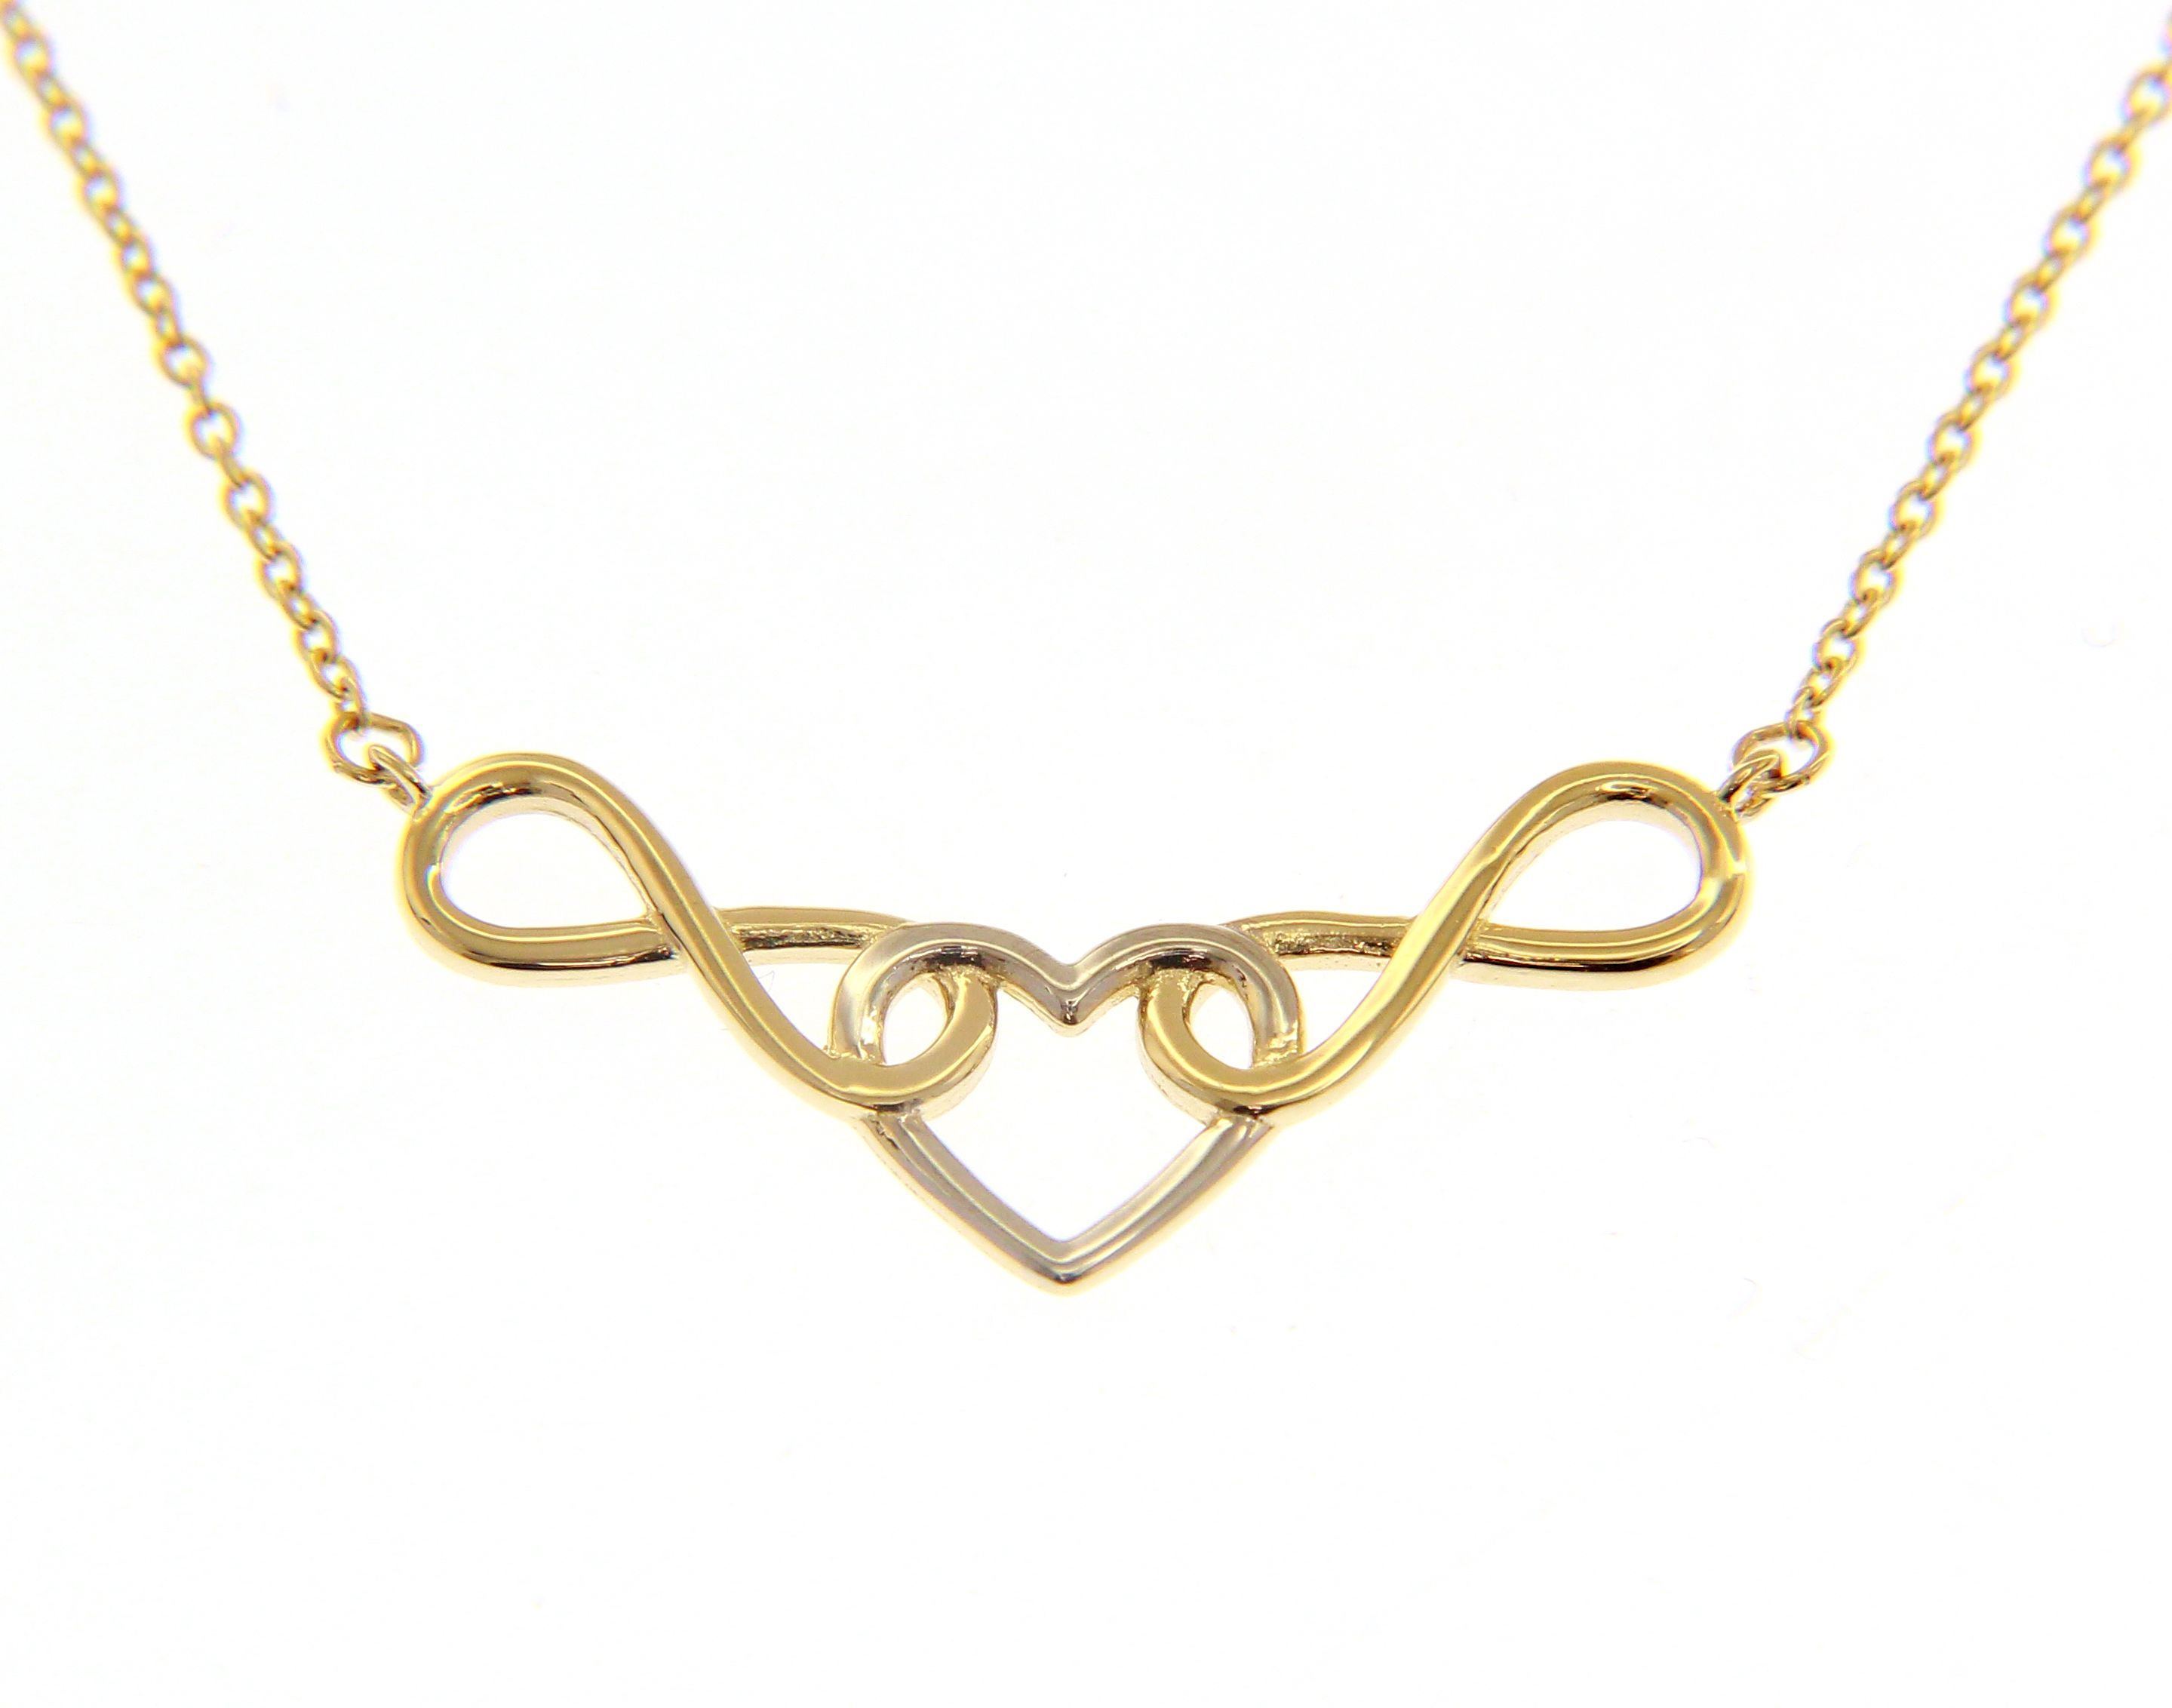 Gold & white gold necklace k14 with heart and infinity symbol (code S214960)